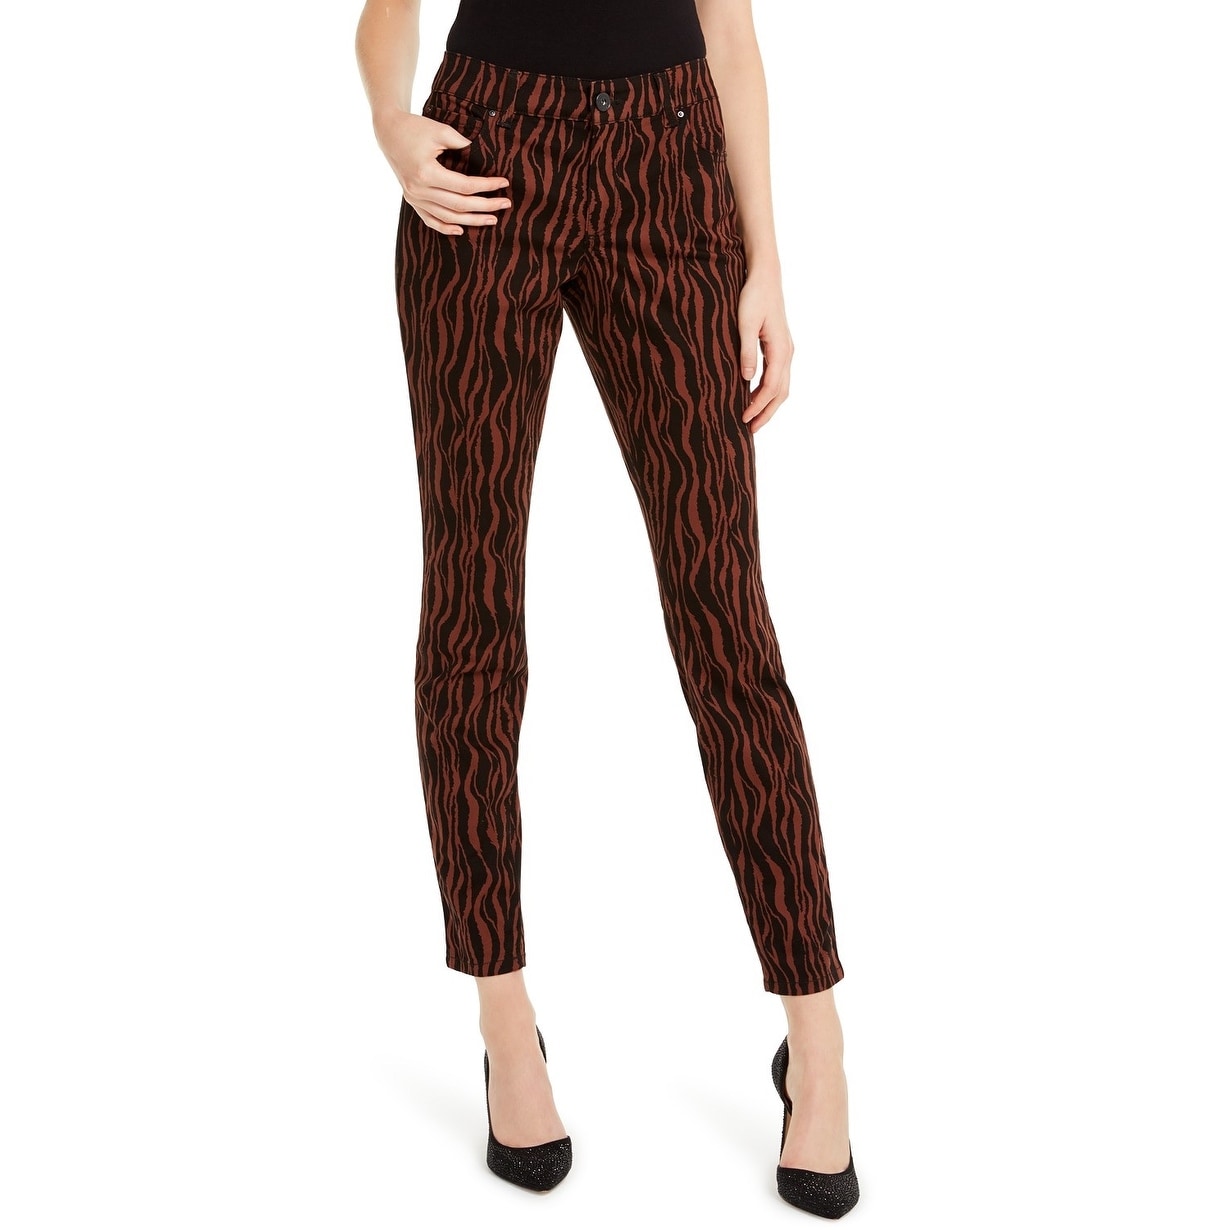 INC International Concepts. Women's Incessentials Tiger-Print Skinny Jeans Brown Size 6